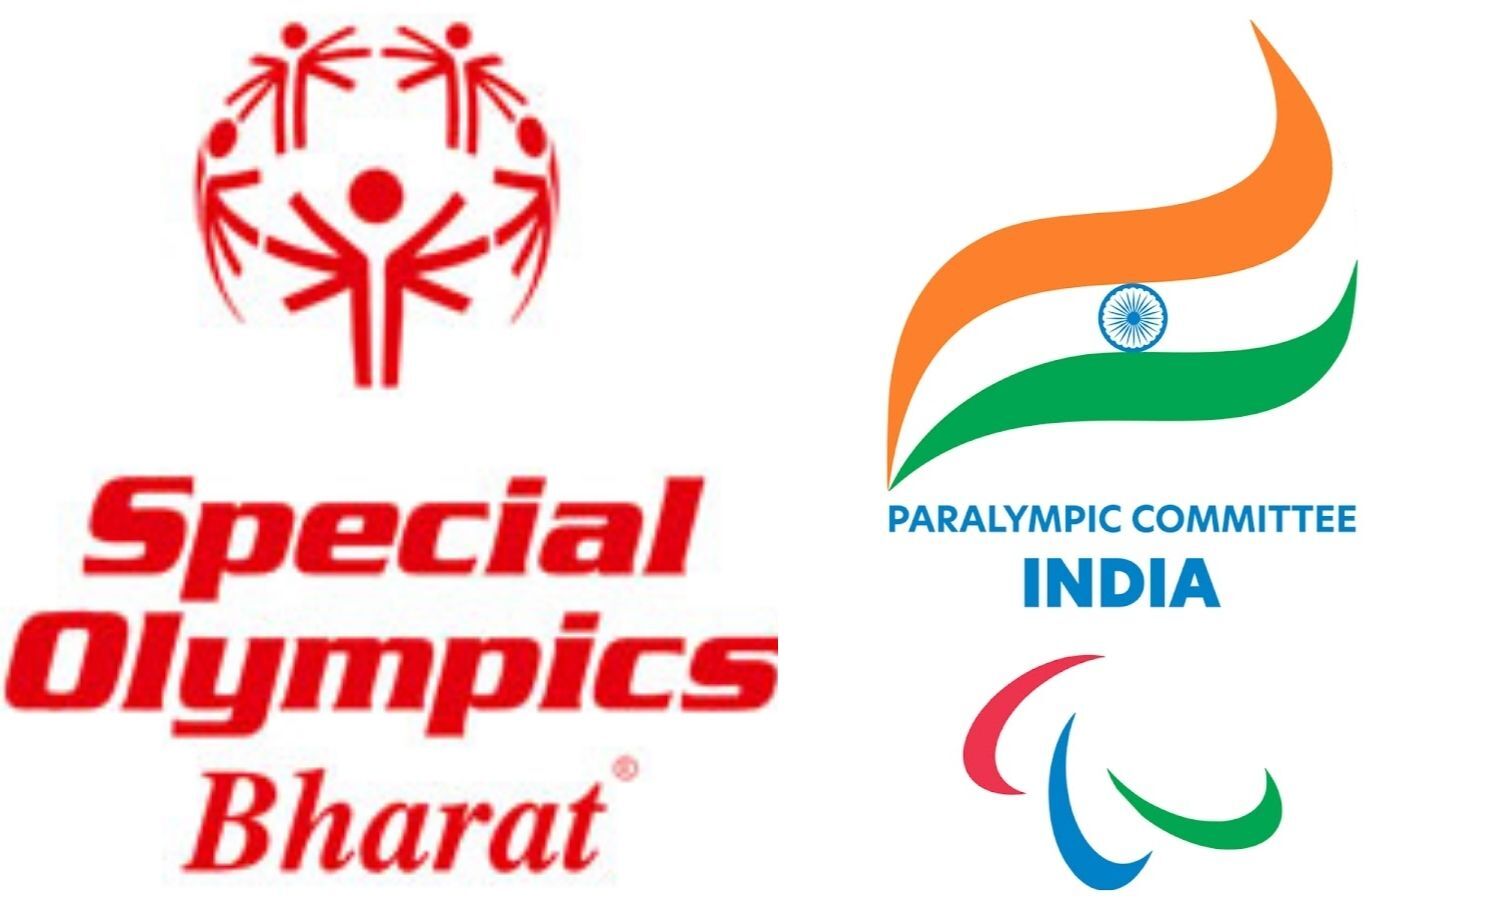 Are Special Olympics and Paralympics the same? What's the difference?